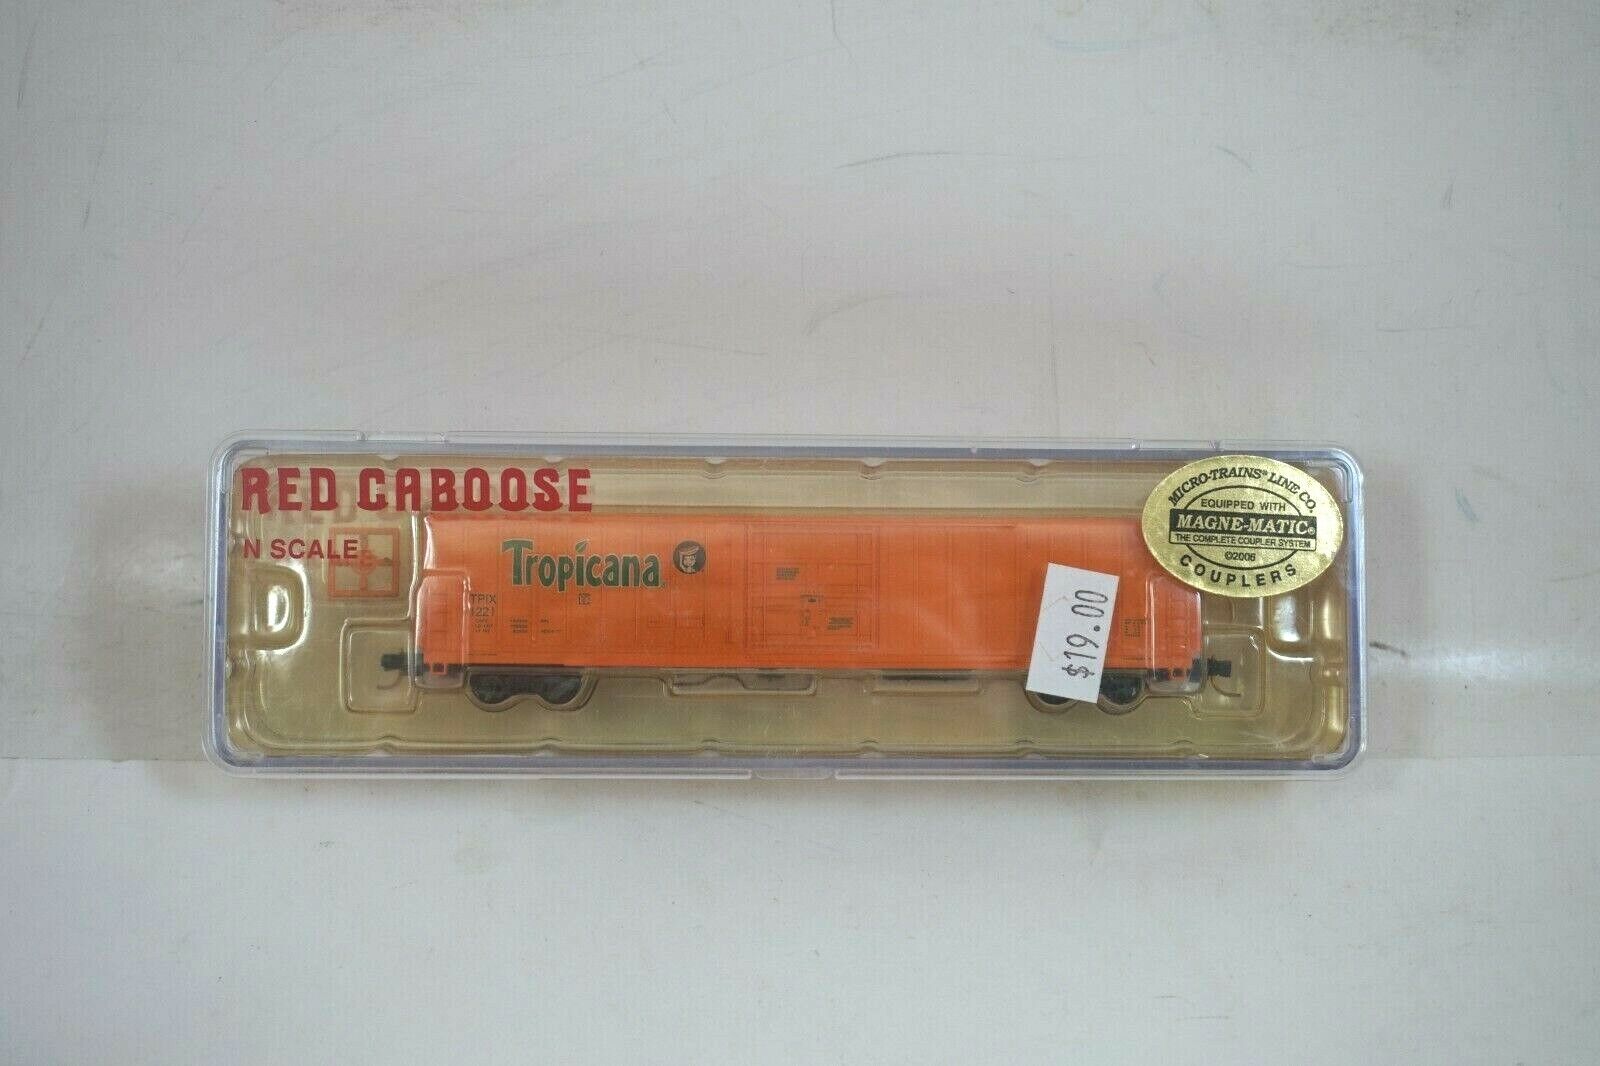 NOS Red Caboose TROPICANA 1221 N Scale 62' Insulated Box Car - RN-17215-21